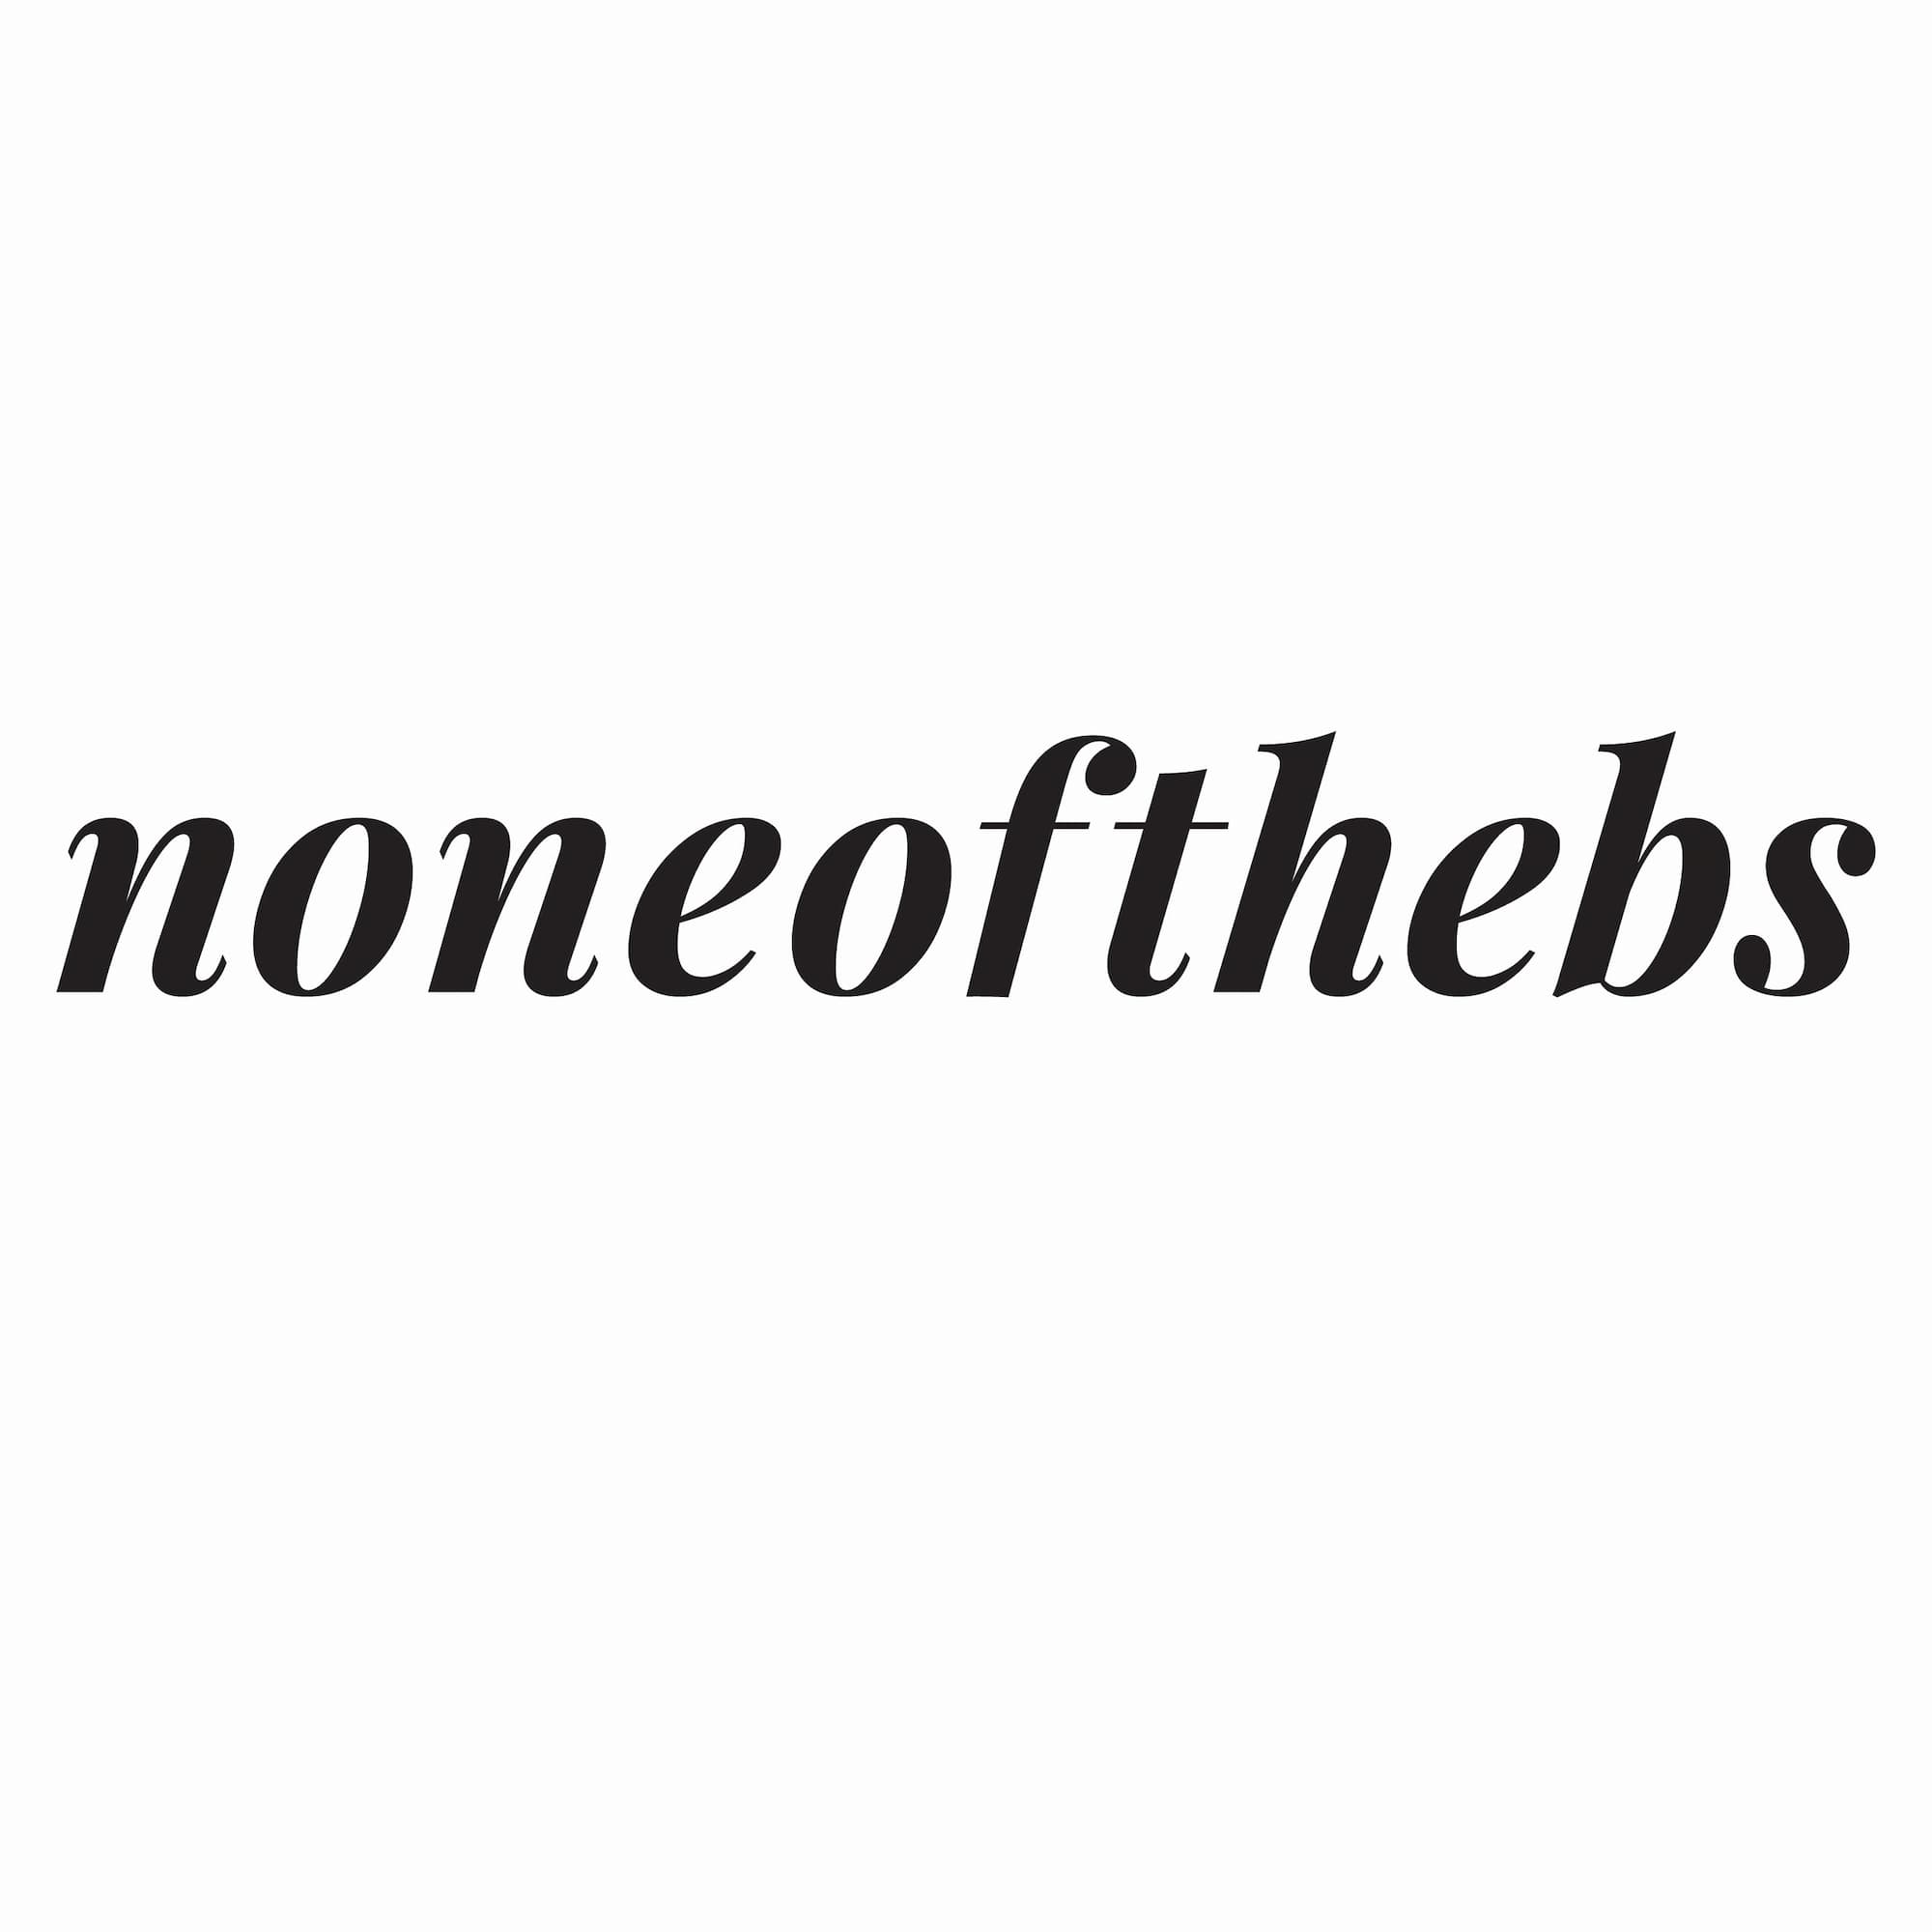 noneofthebs